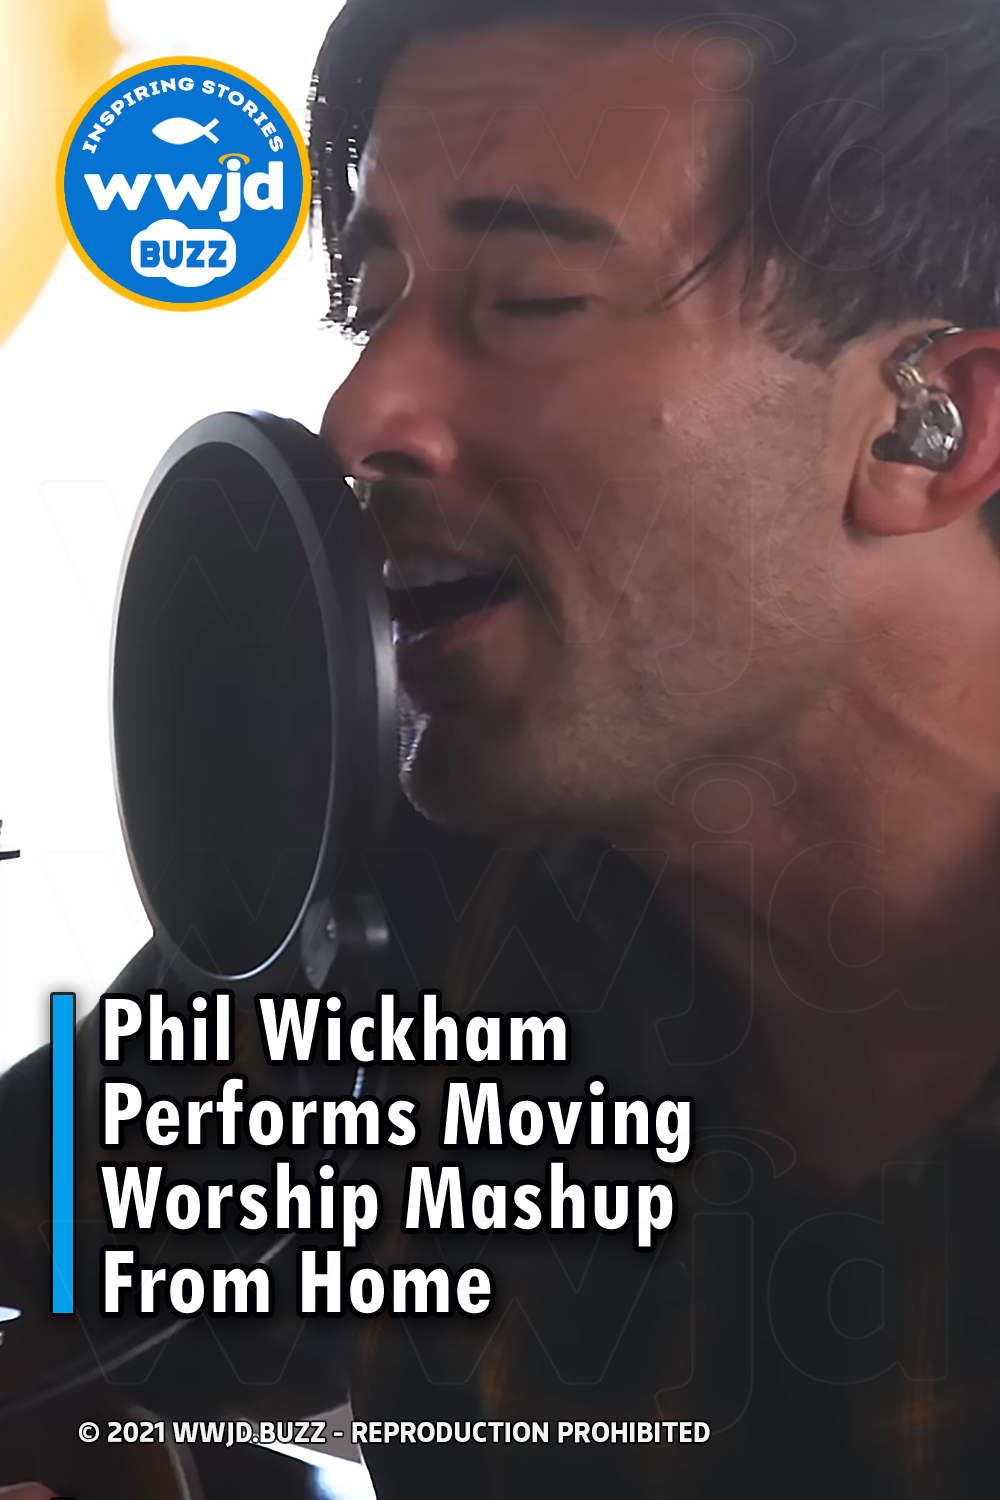 Phil Wickham Performs Moving Worship Mashup From Home